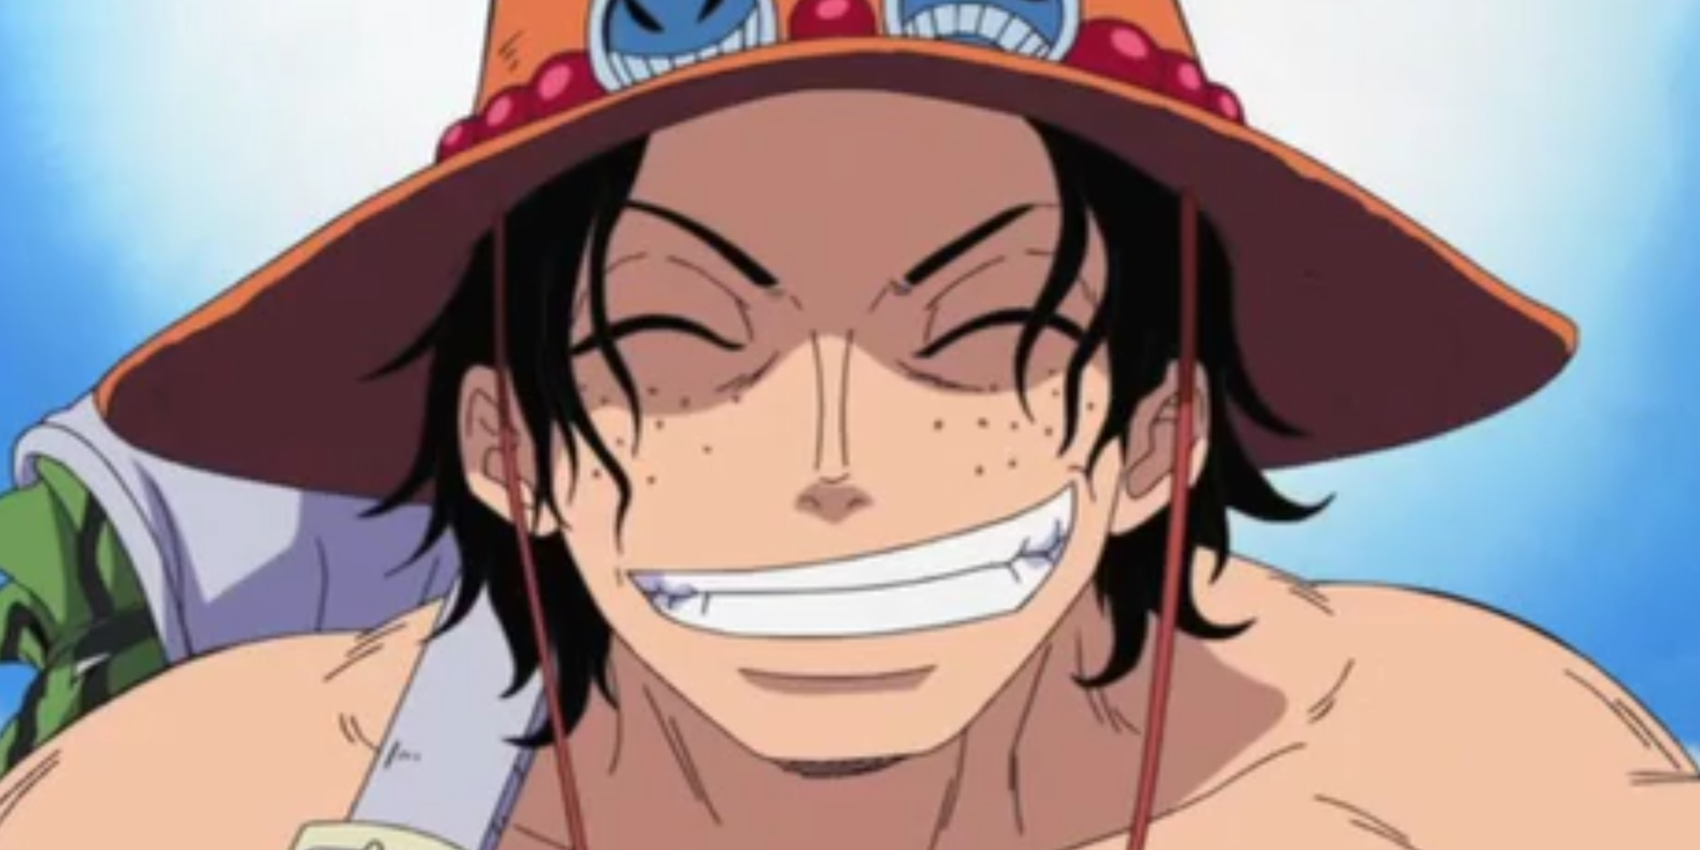 Official One Piece Voice Actor Celebrates Luffy's Birthday With Original Artwork